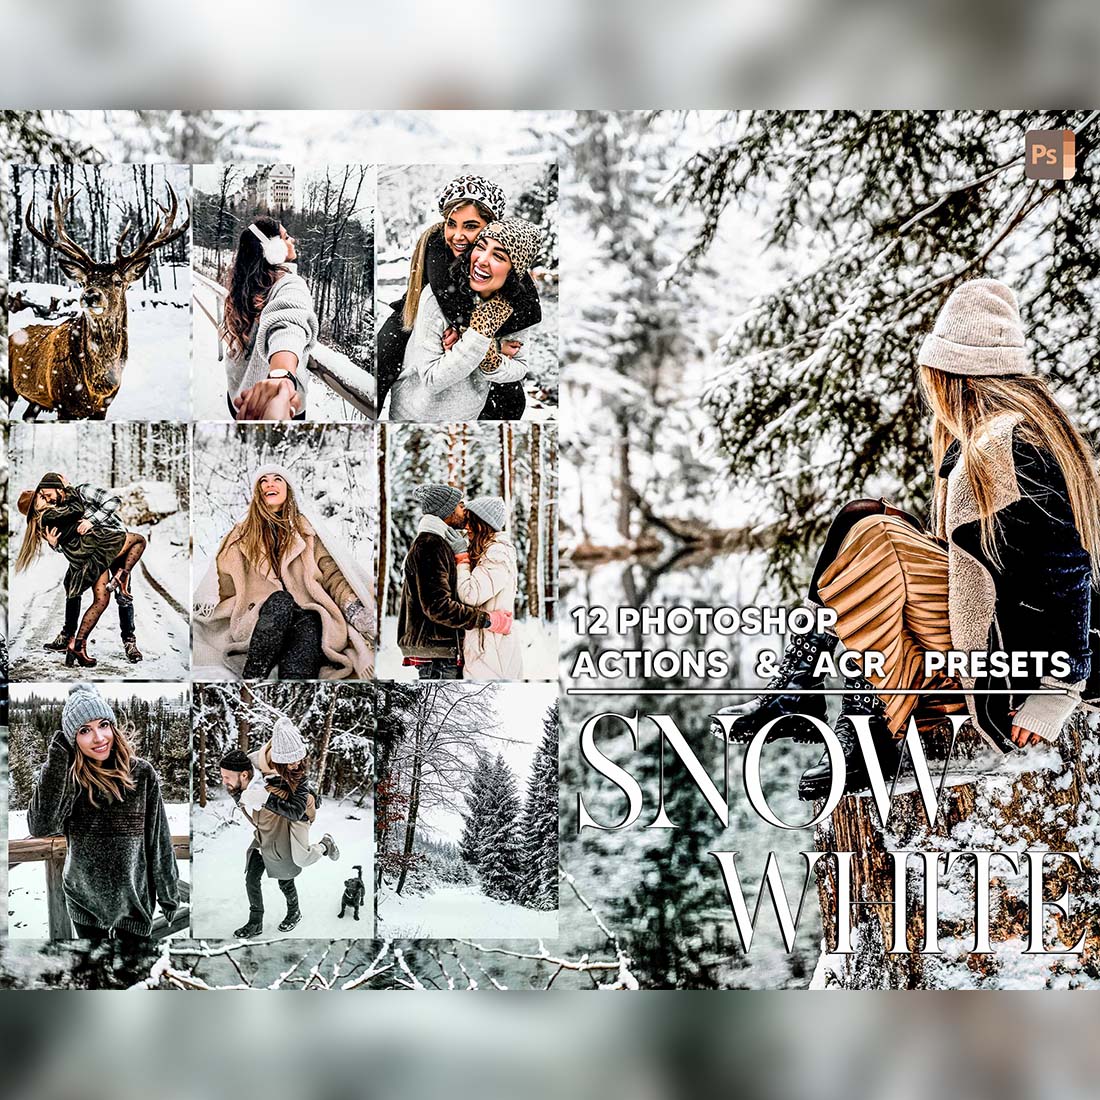 12 Photoshop Actions, Snow White Ps Action, Moody ACR Preset, Cool Light Ps Filter, Atn Pictures And style Theme For Instagram, Blogger cover image.